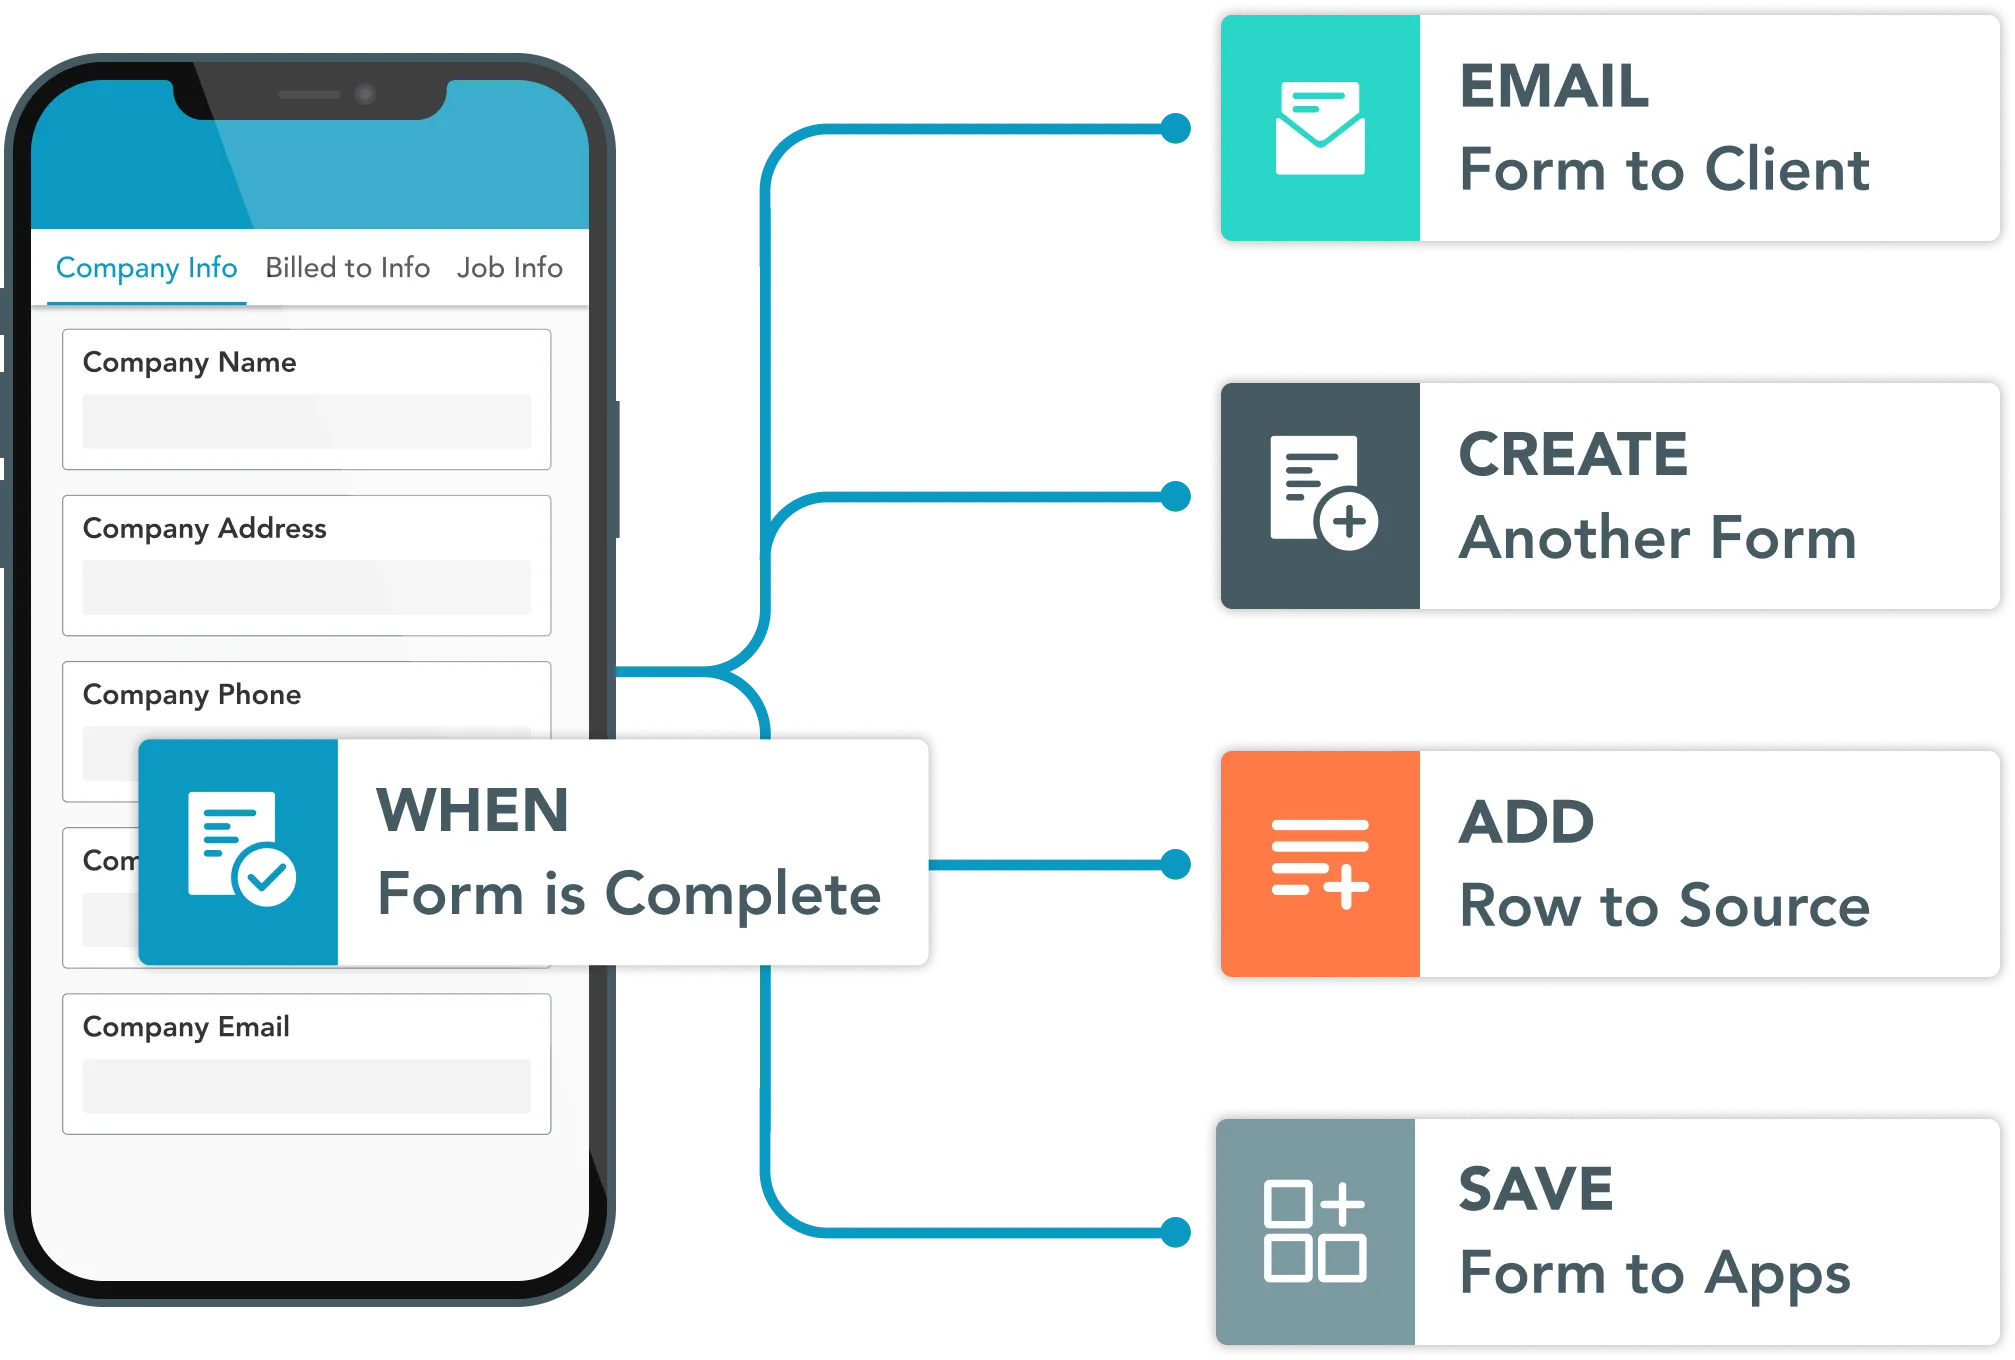 Form workflows make it easy to send, receive, and transfer data.